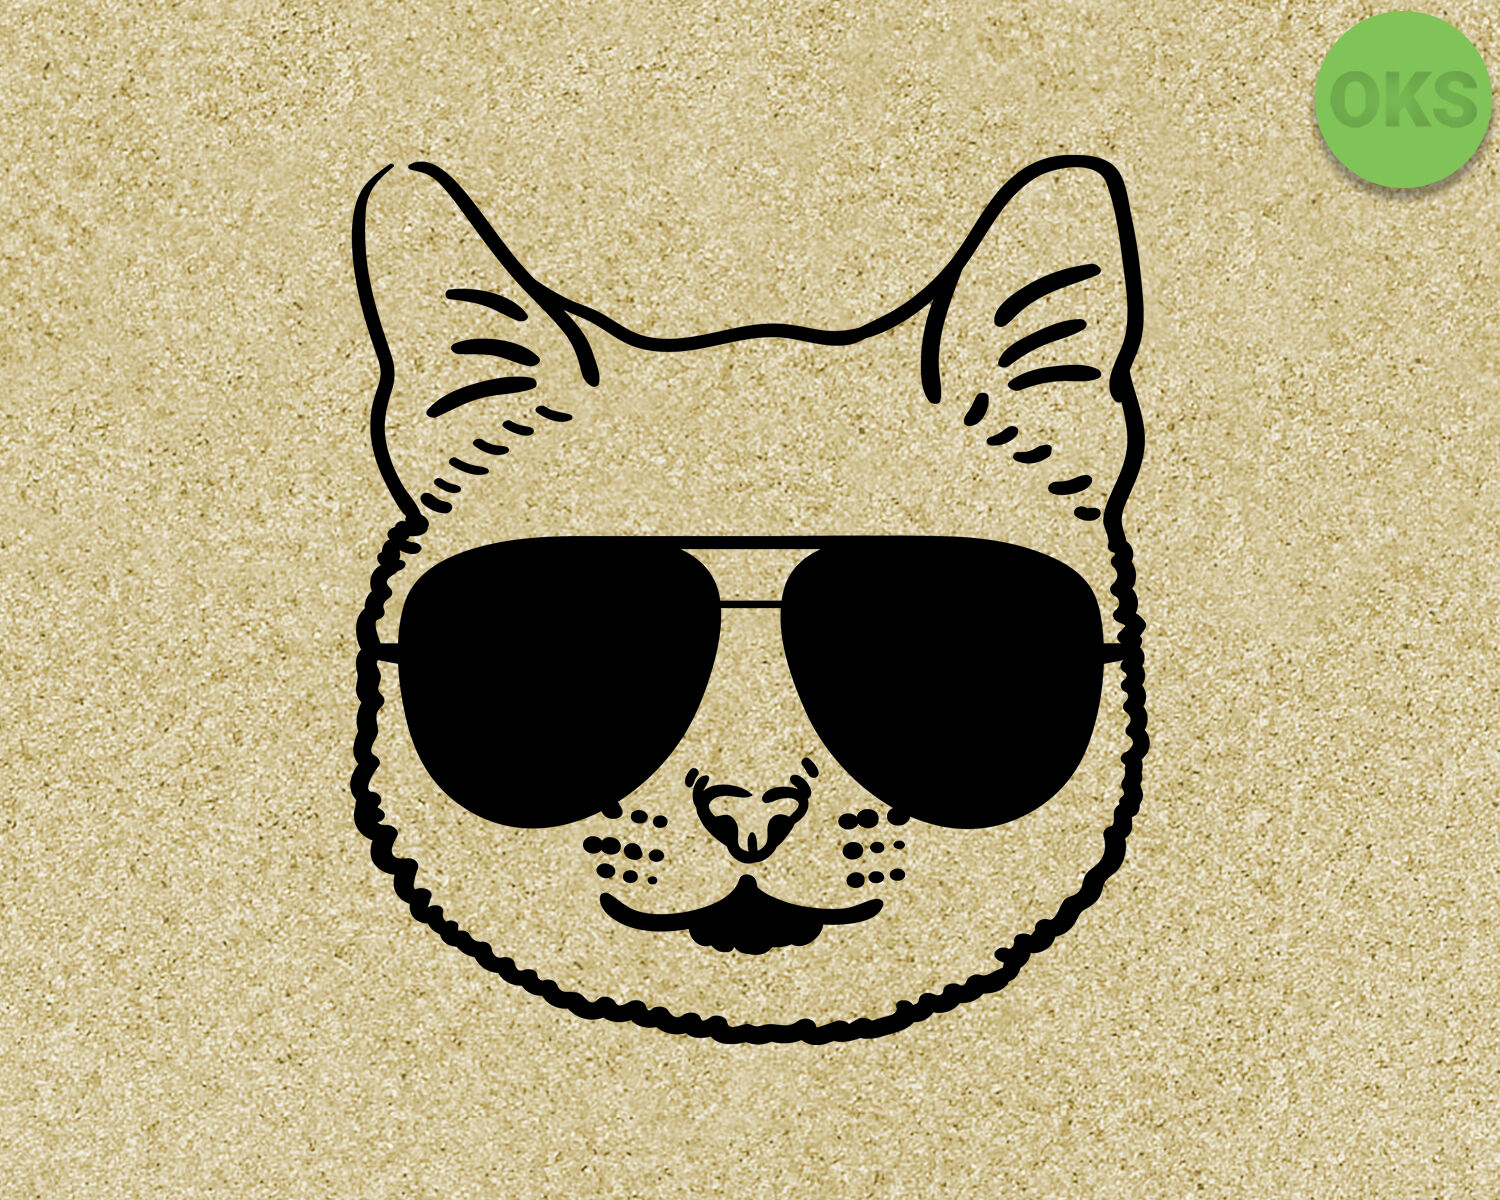 kittens with sunglasses